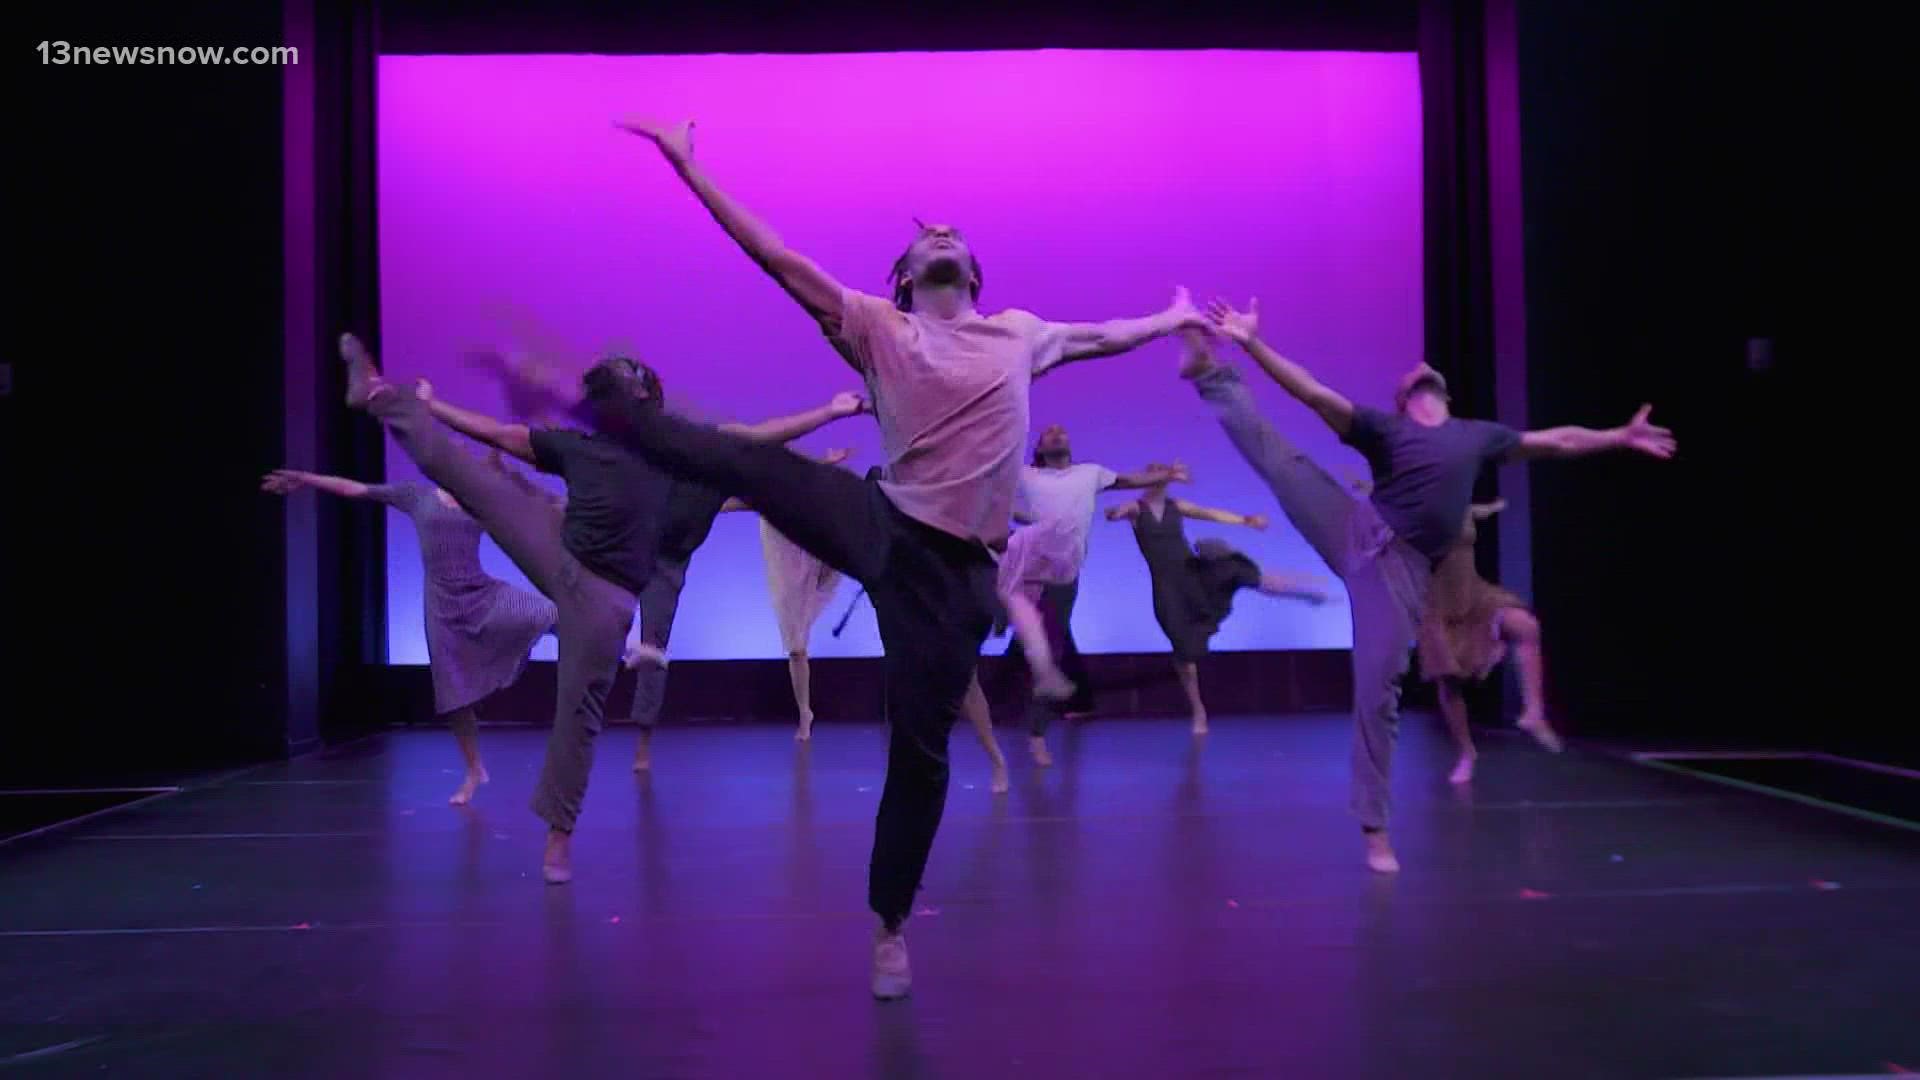 The company is putting representation and diversity at the forefront. Their next production will be Sleeping Beauty, at the Sandler Center in April.